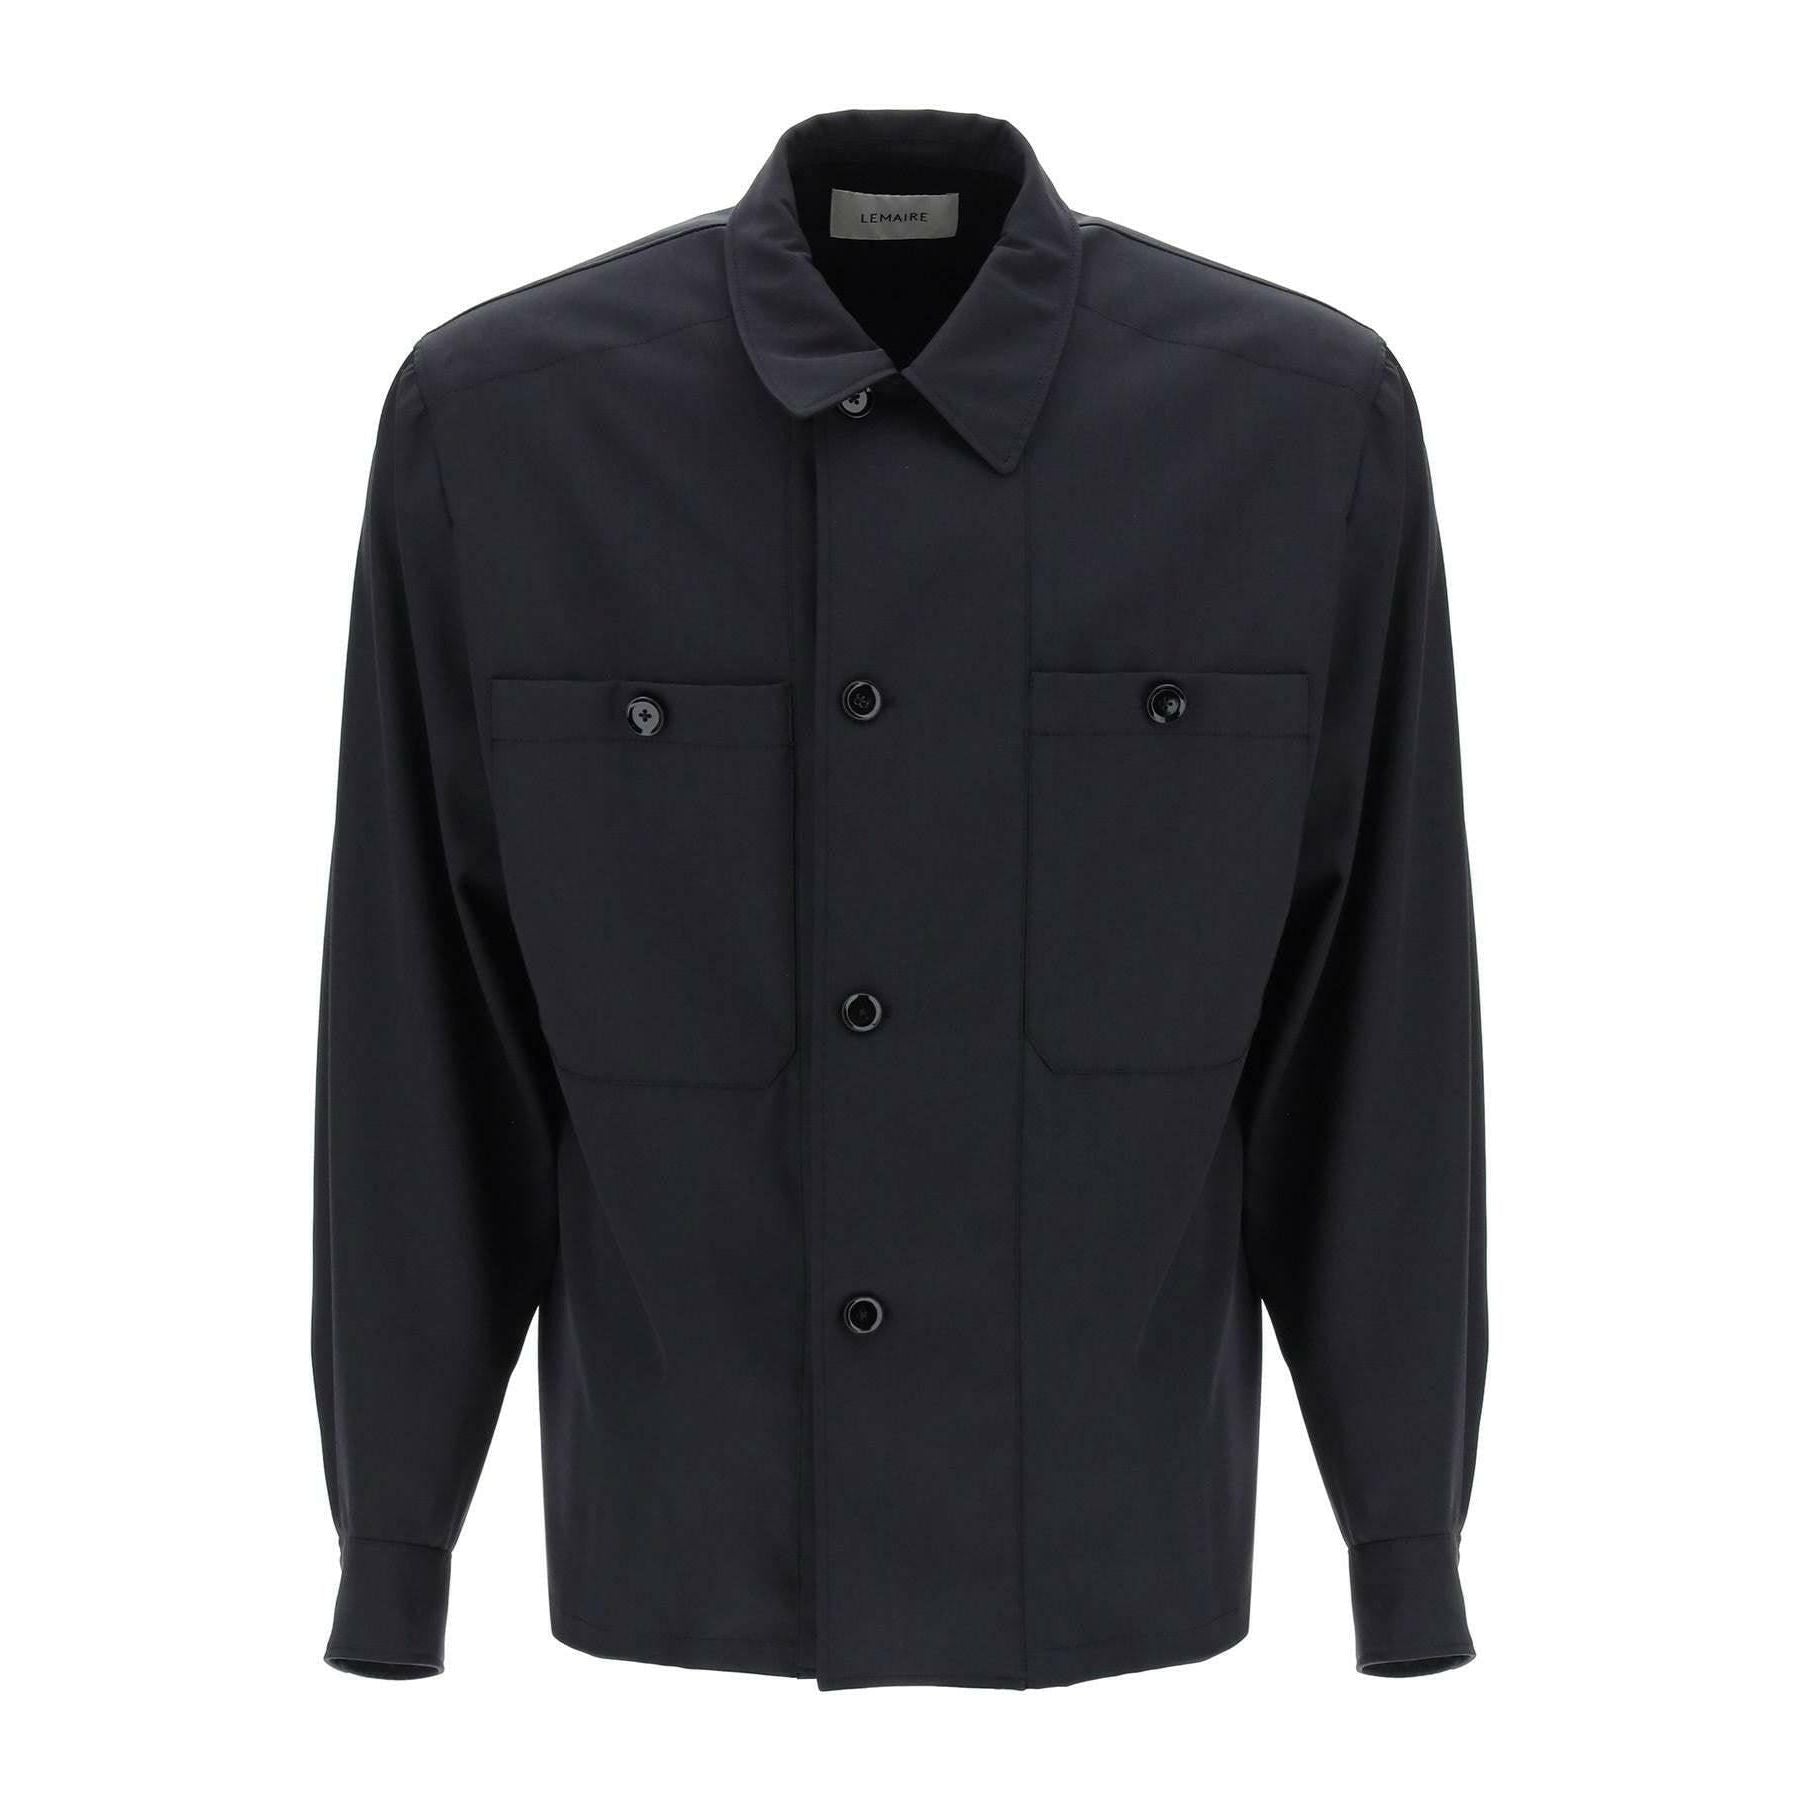 Jet Black Soft Military Light Wool Overshirt with Double Placket LEMAIRE JOHN JULIA.